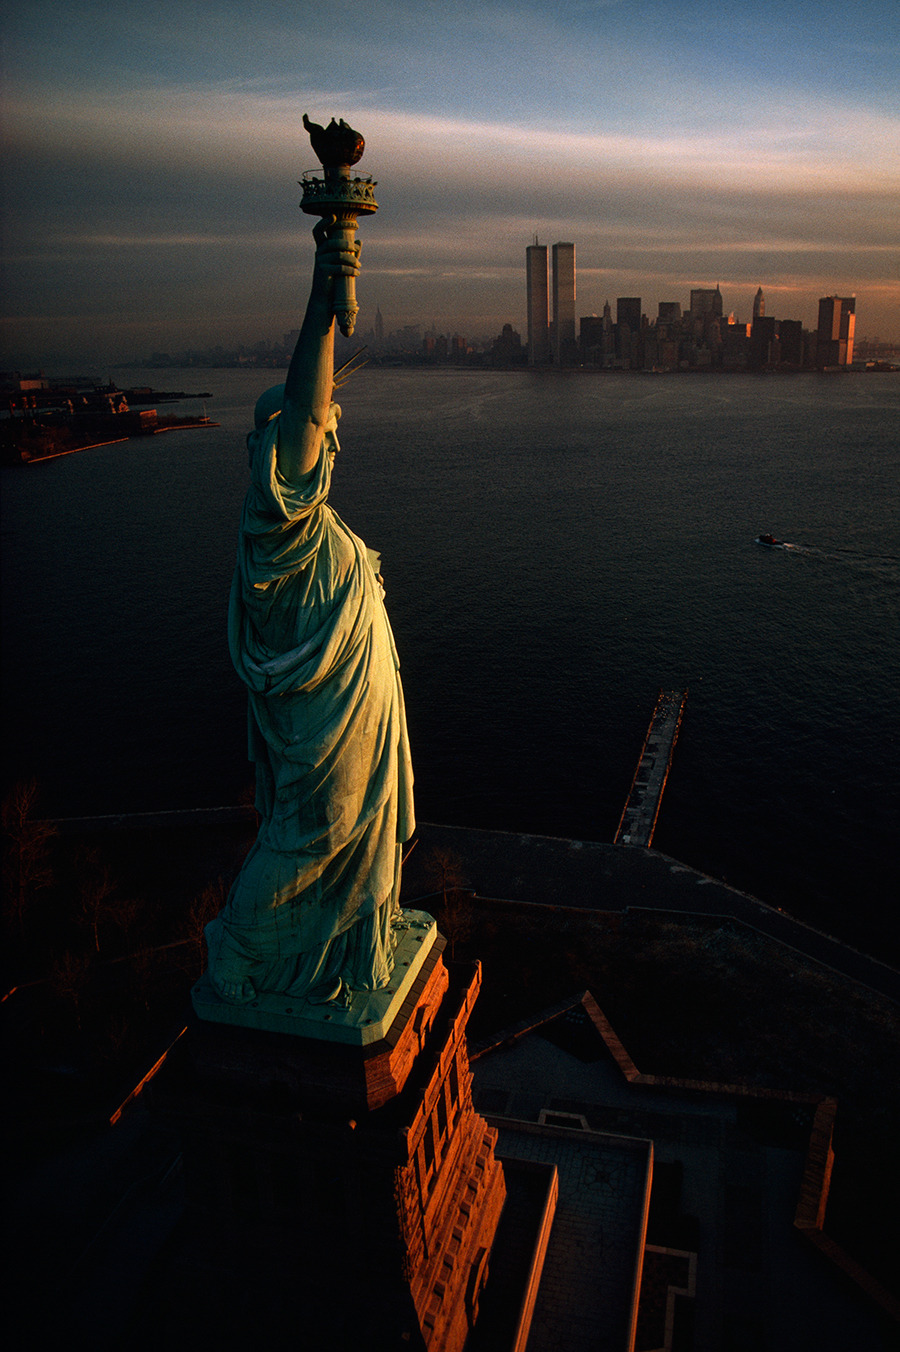 The Statue of Liberty hails dawn over New York Harbor in 1978.Photograph by David Alan Harvey, National Geographic Creative